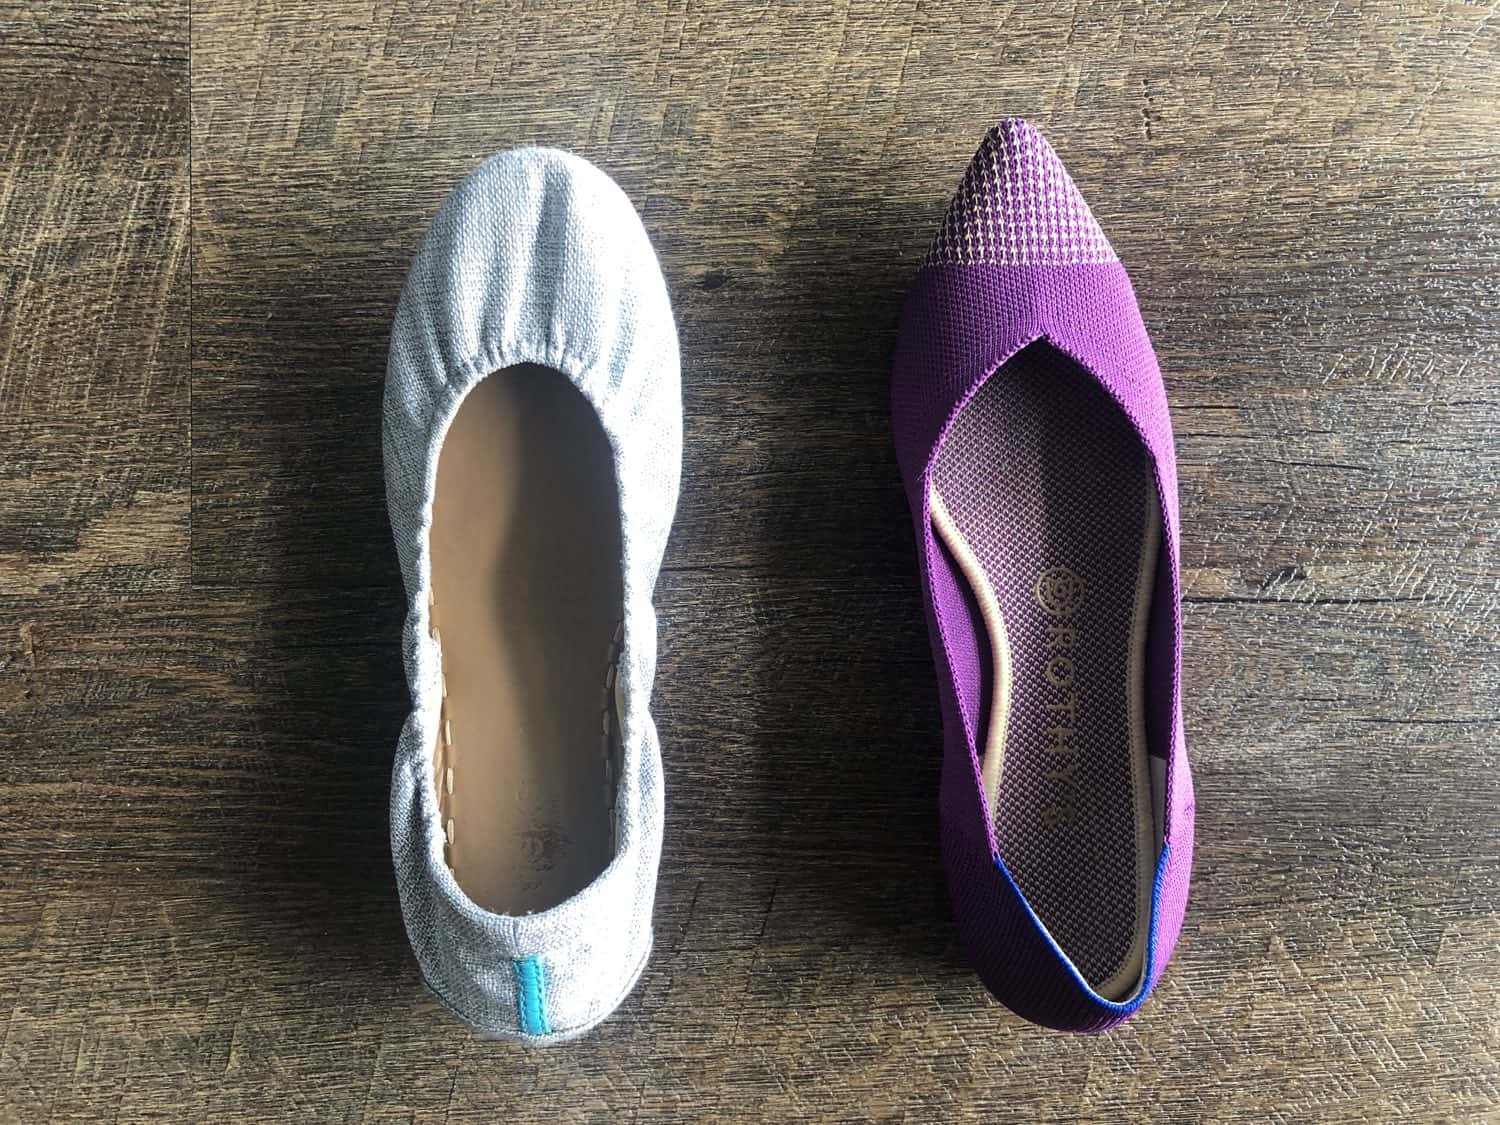 Tieks vs Rothys - a comparison of these comfortable flats